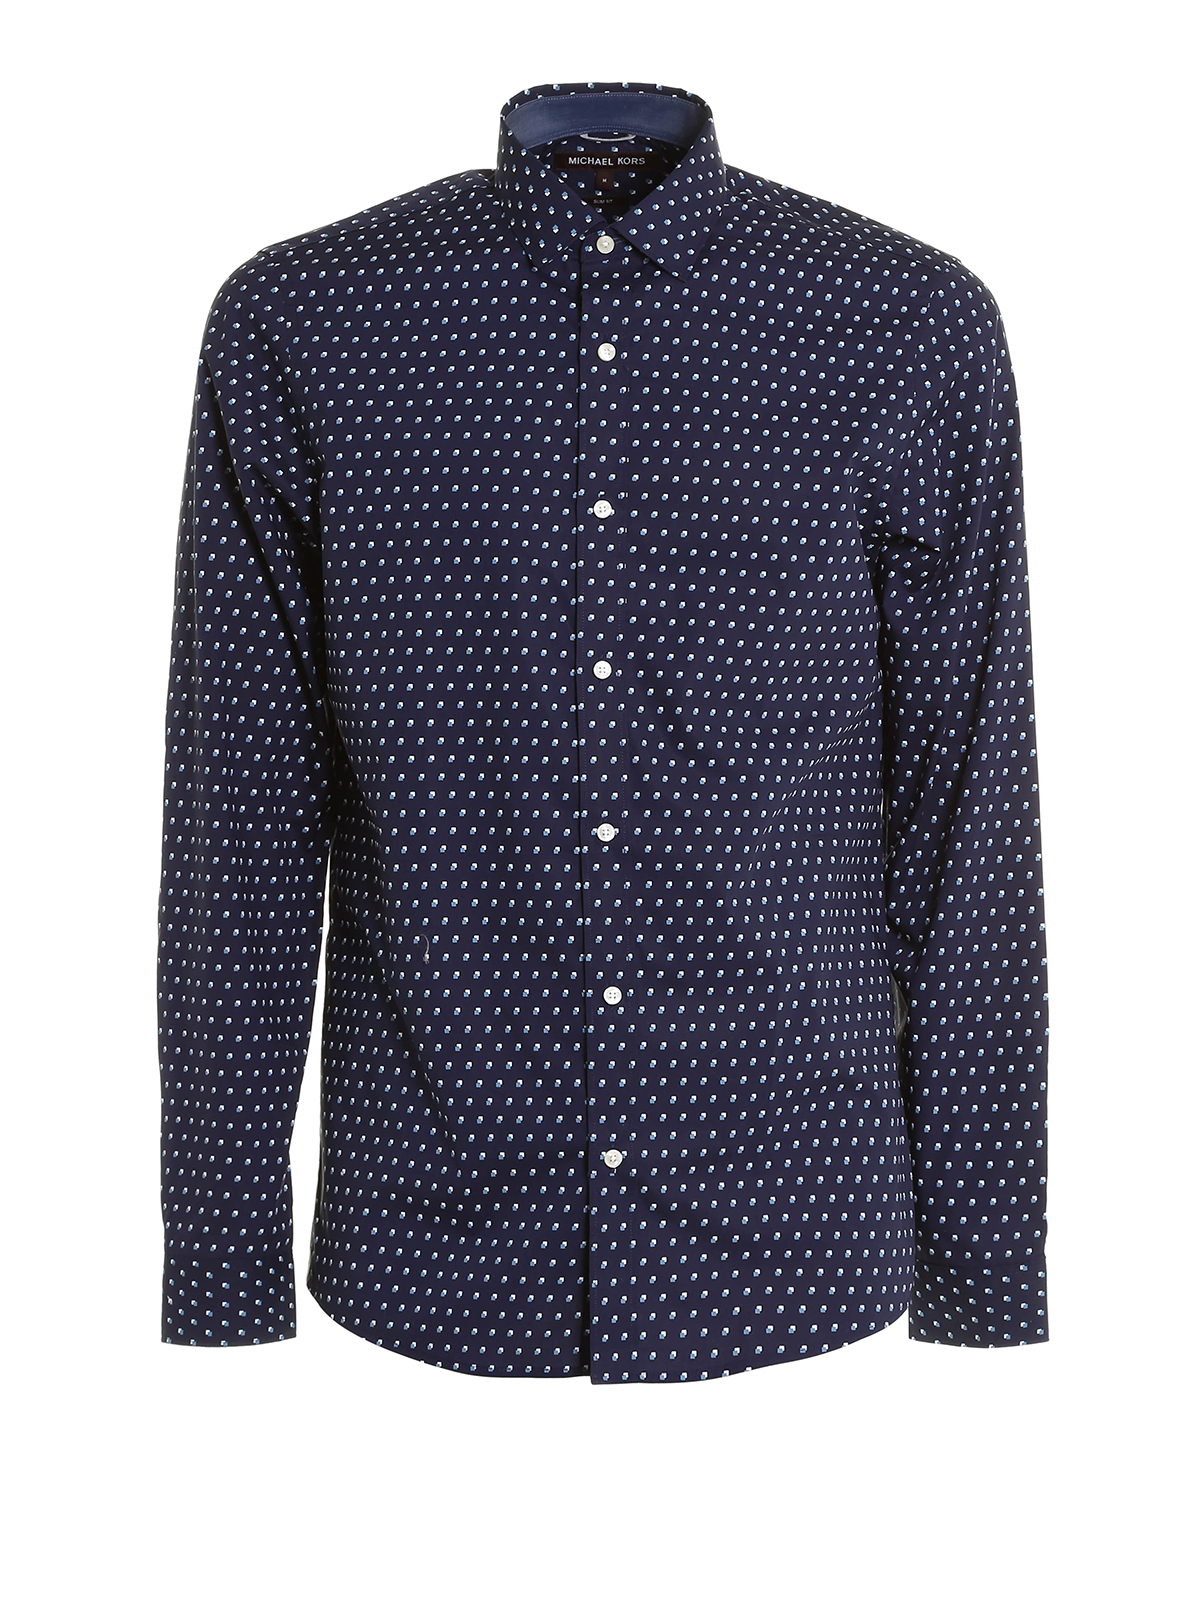 Michael Kors Patterned Cotton Shirt In Blue